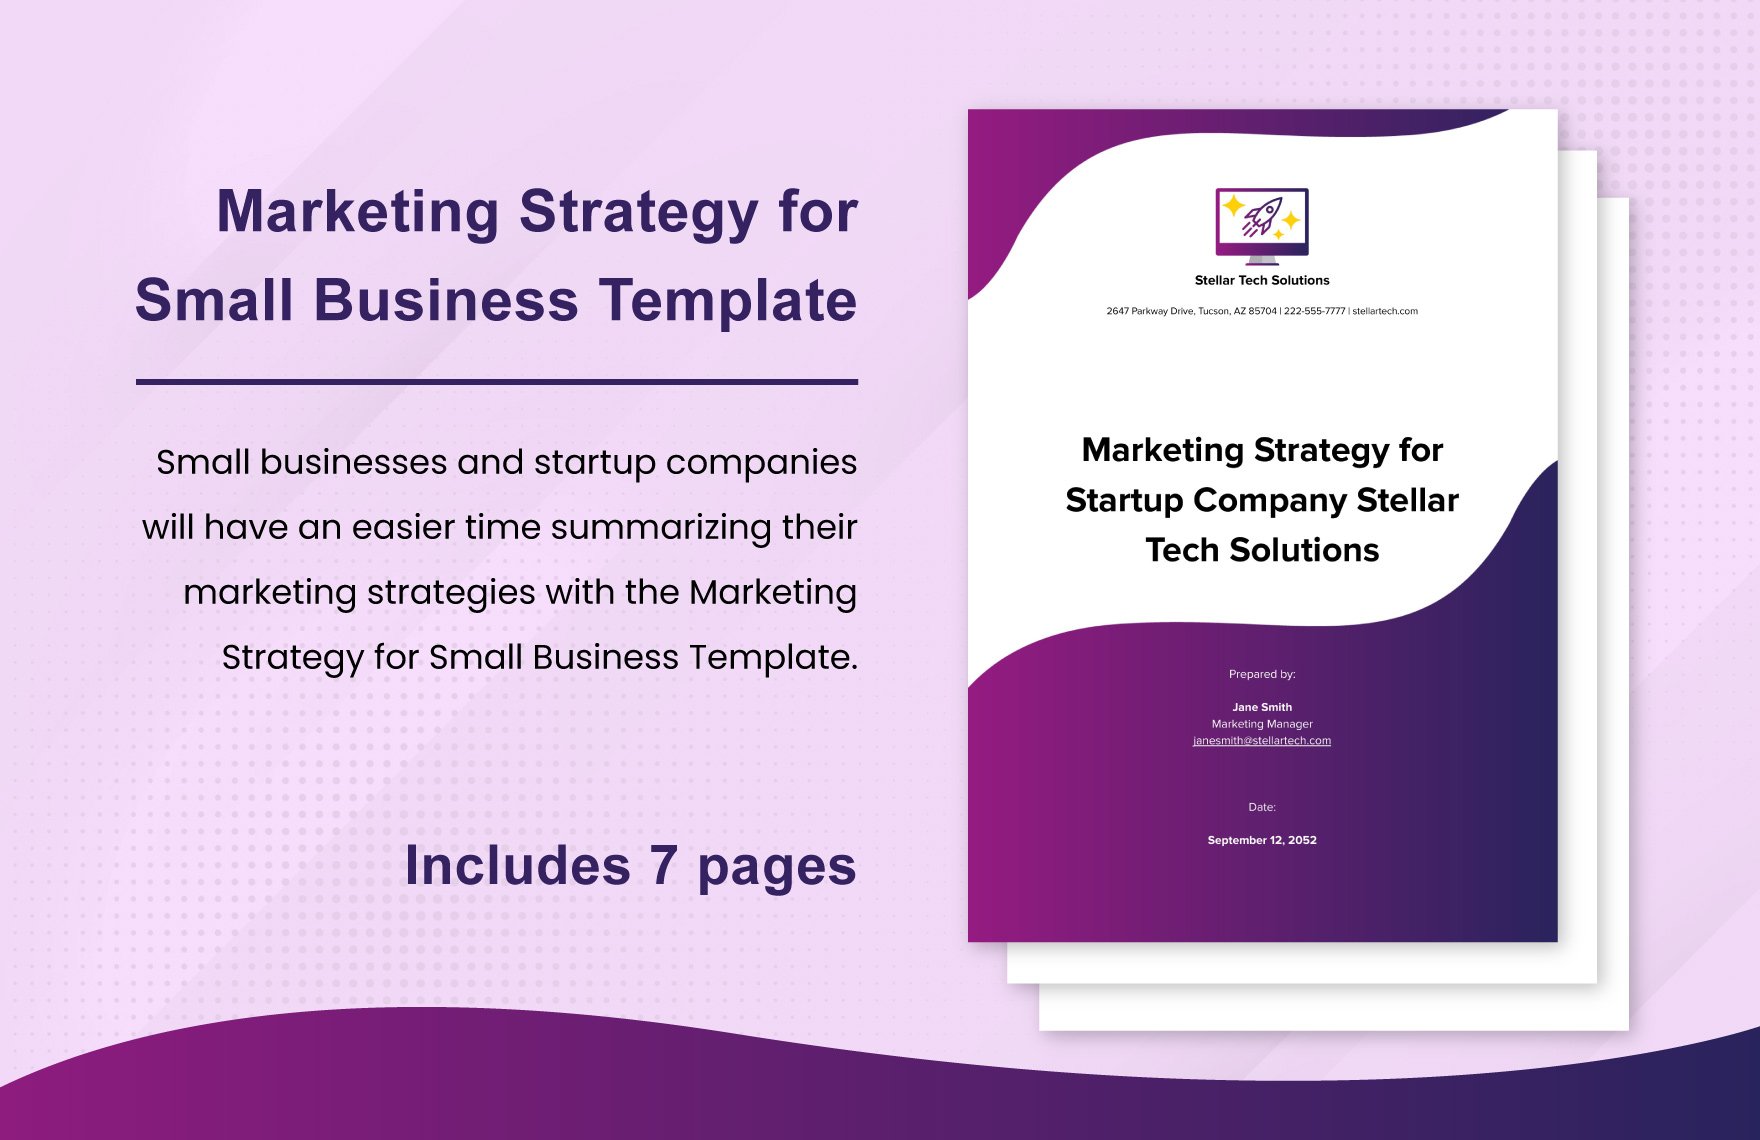 Marketing Strategy for Small Business Template